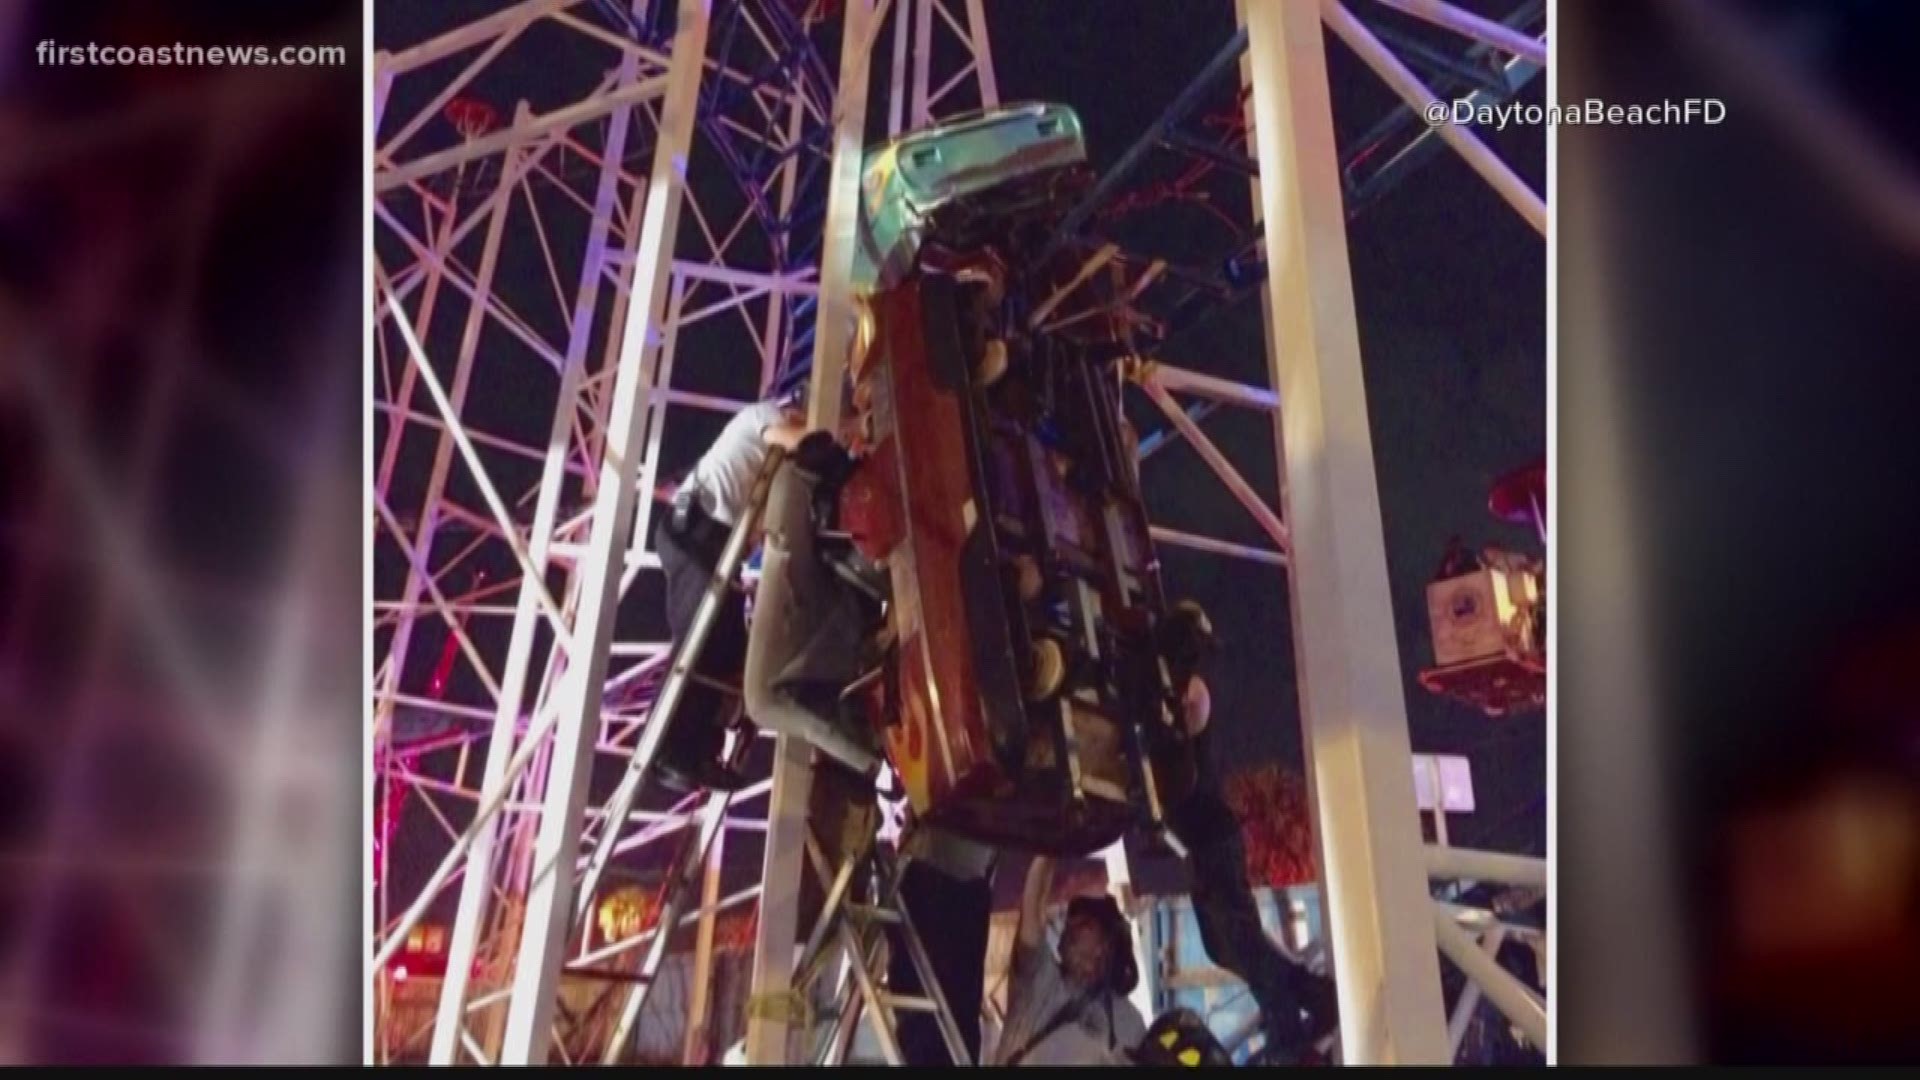 Ten people were extricated from the roller coaster. Six of them were sent to the hospital. No word on the extent of the injuries of the patients.